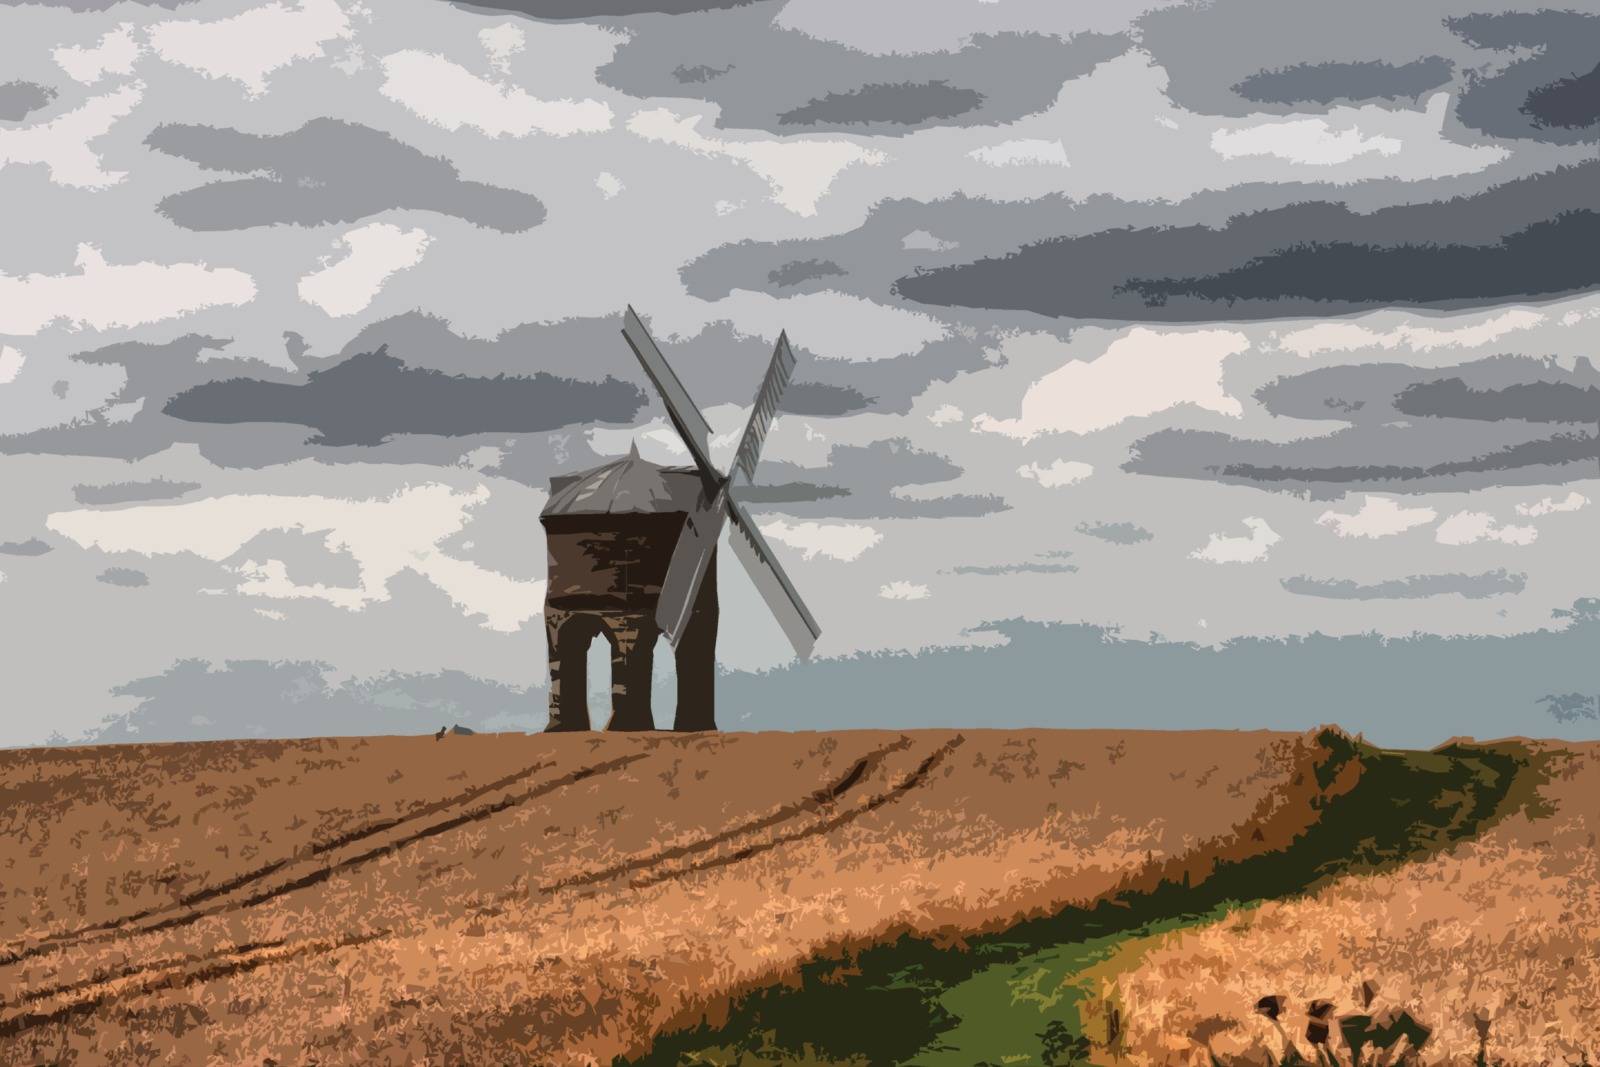 Chesterton Windmill under a moody cloudy sky